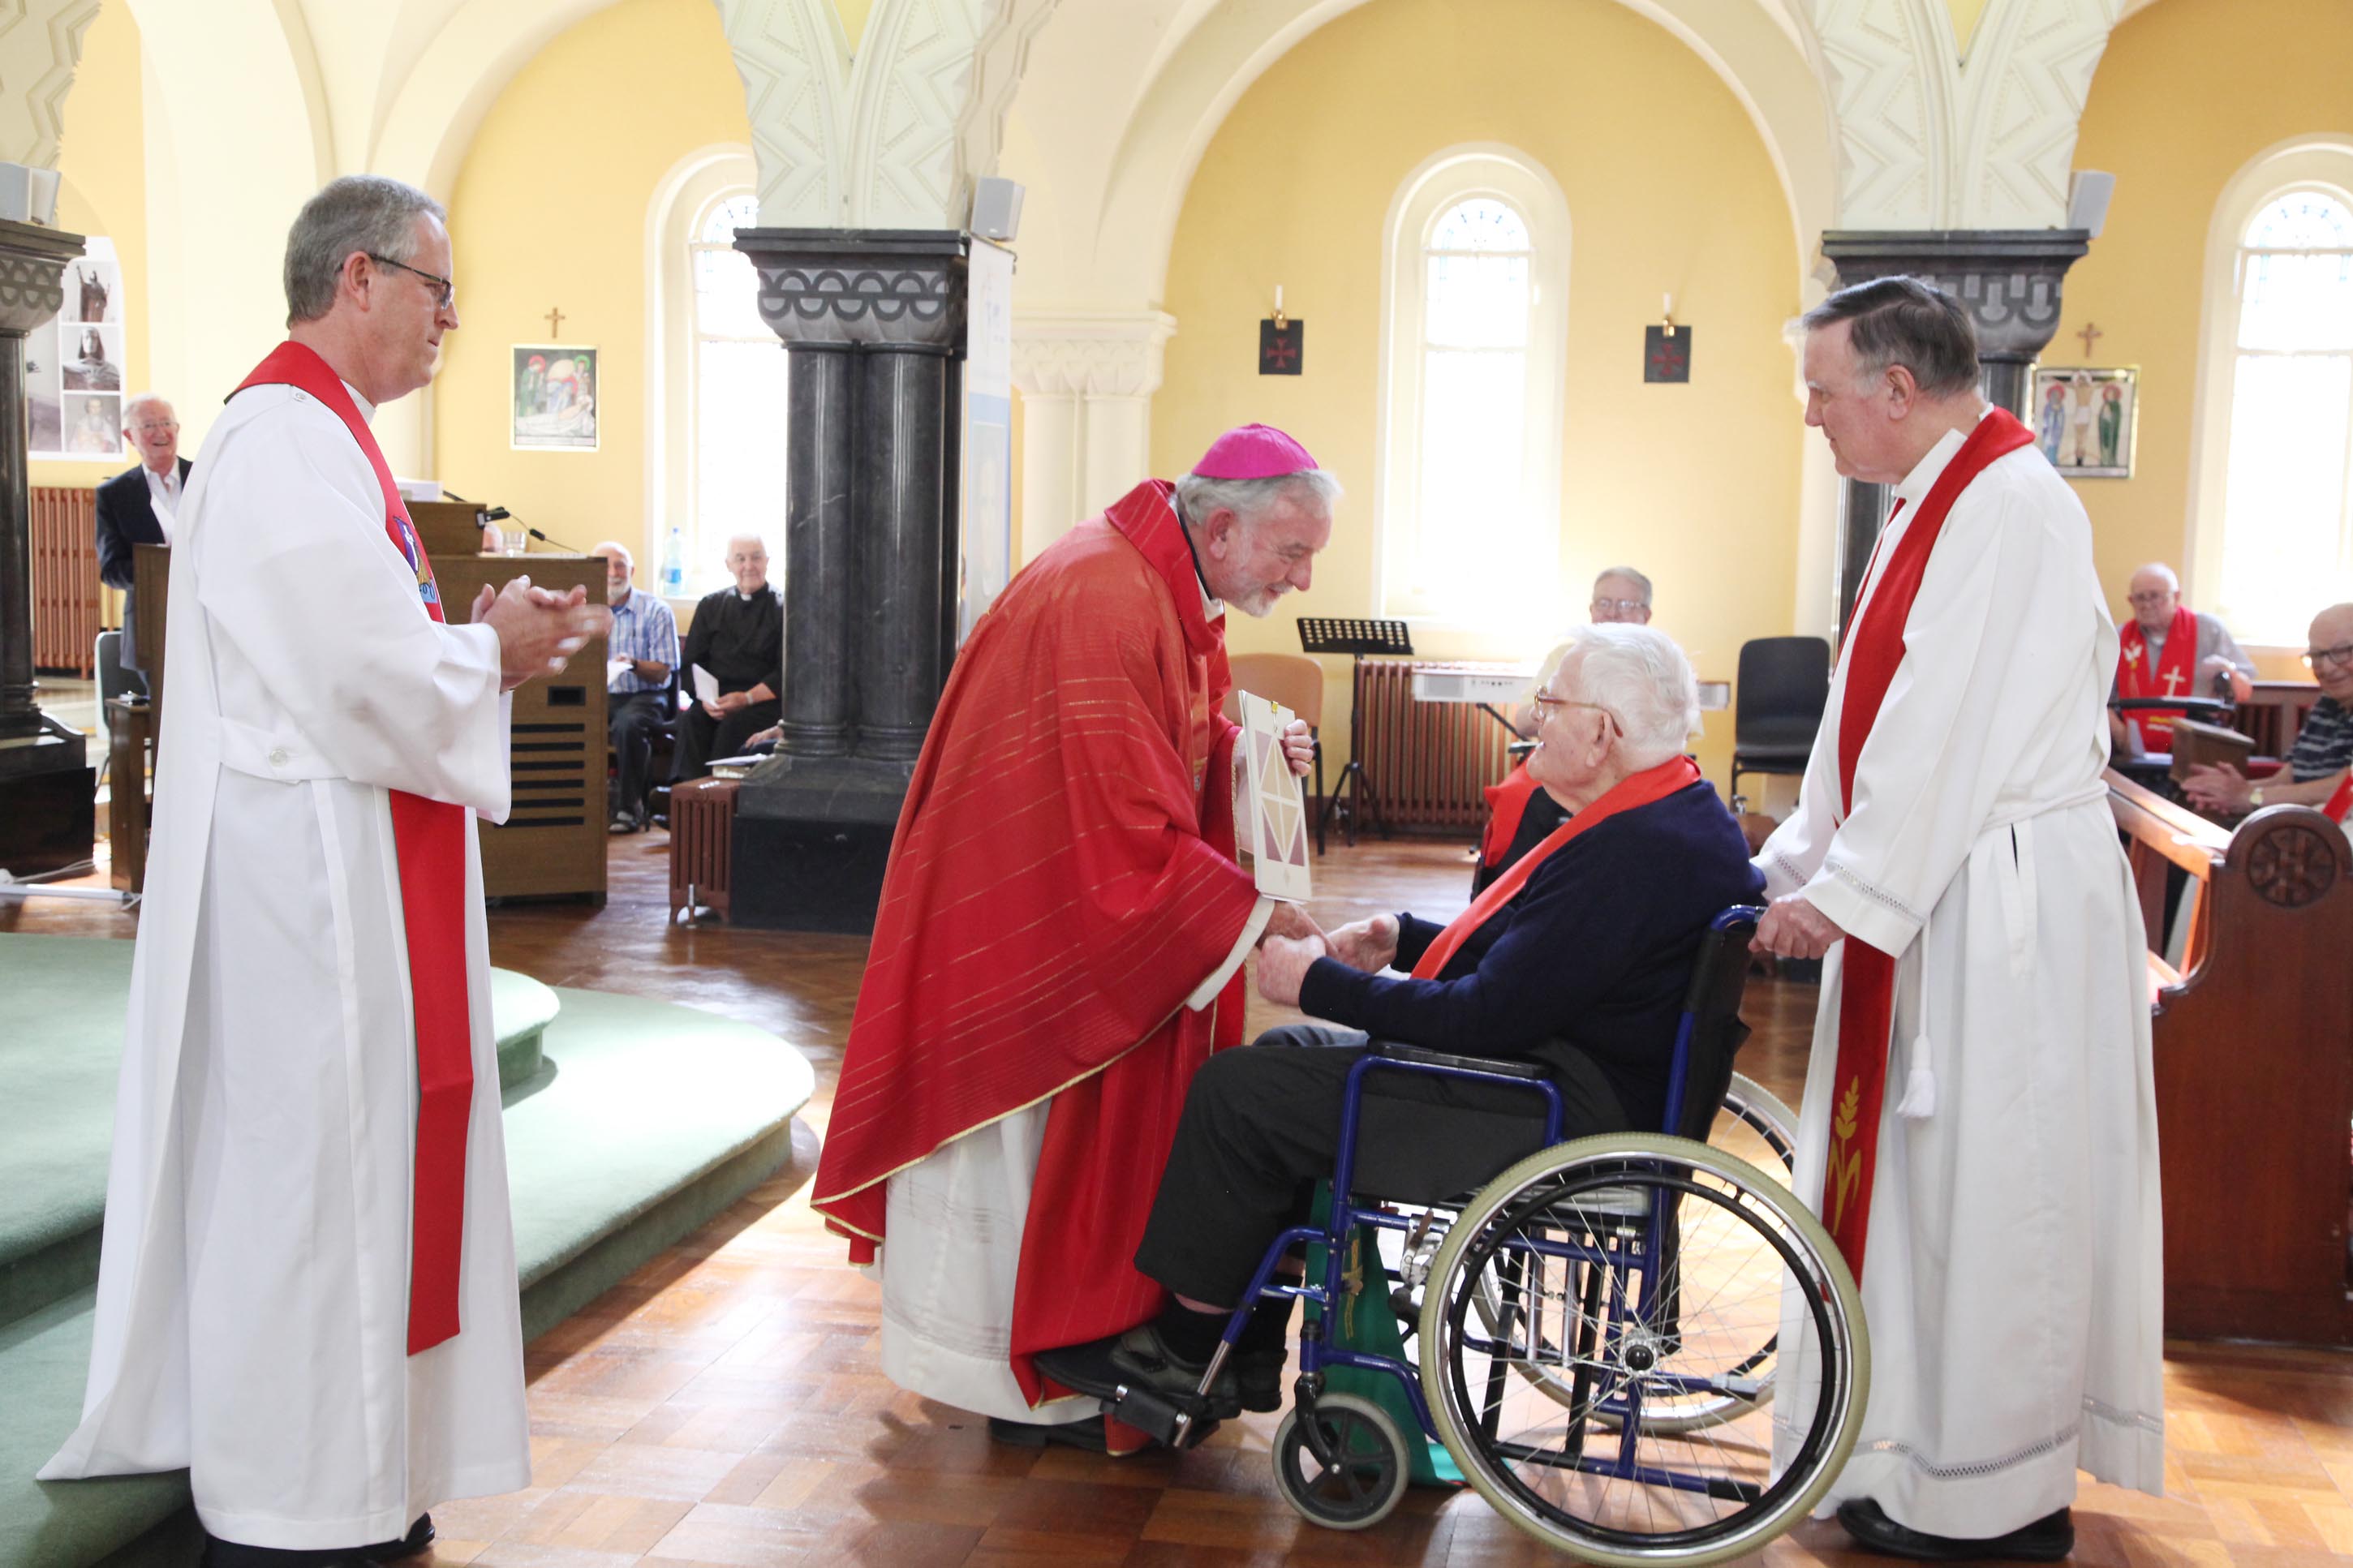 Archbishop Kieran O’Reilly’s homily for Foundation Day